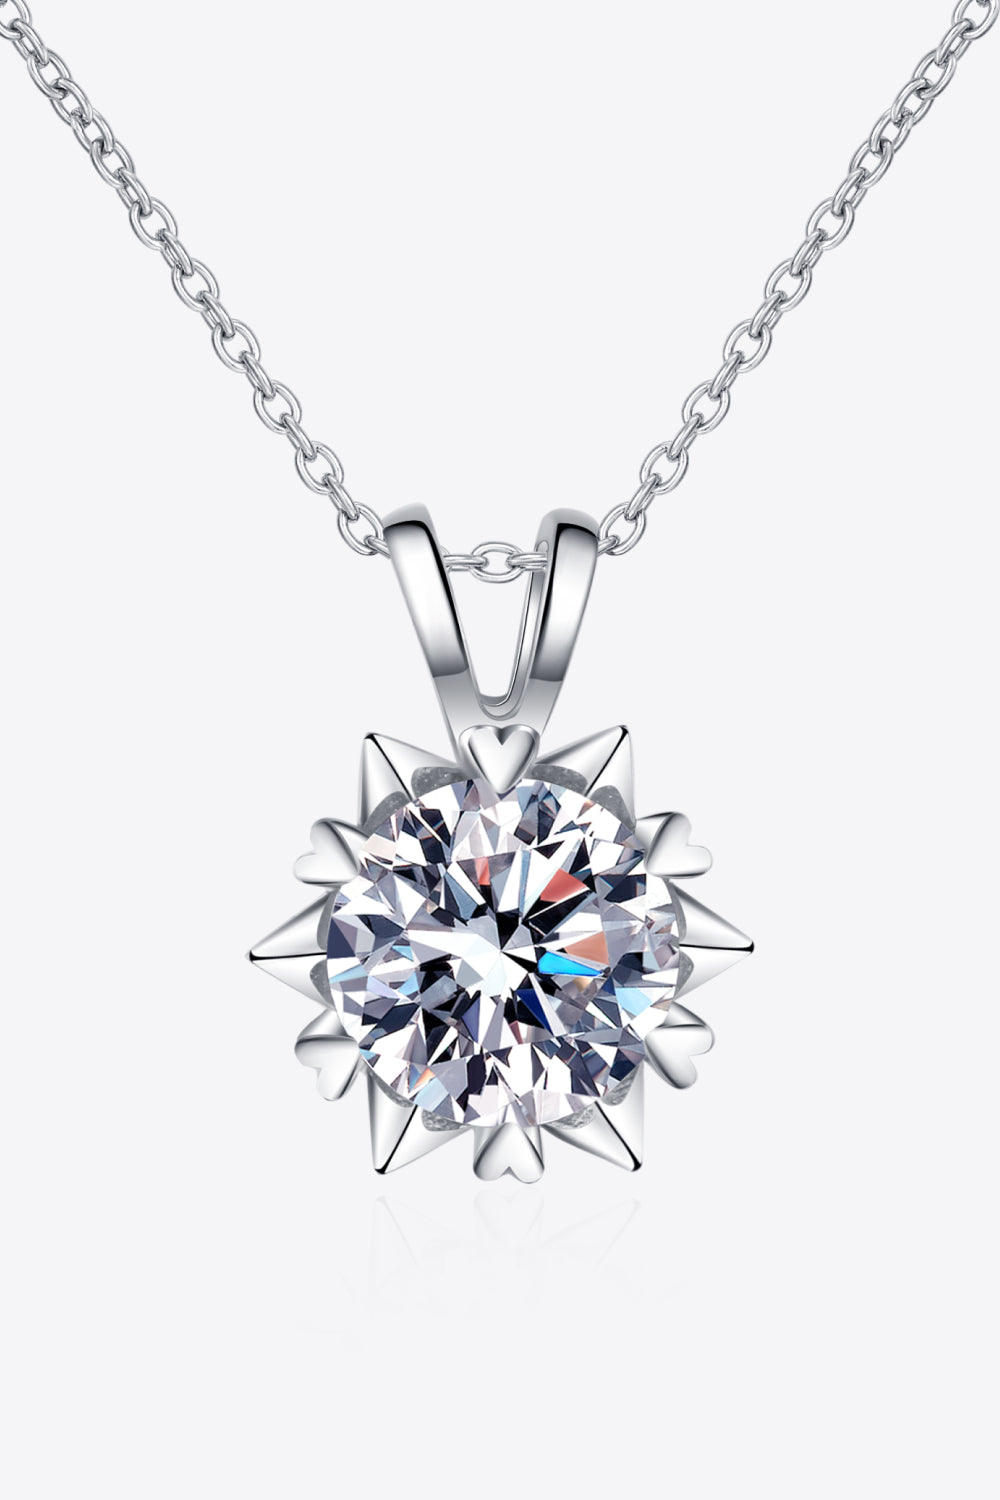 Learning To Love 925 Sterling Silver Moissanite Pendant Necklace - Necklaces - FITGGINS